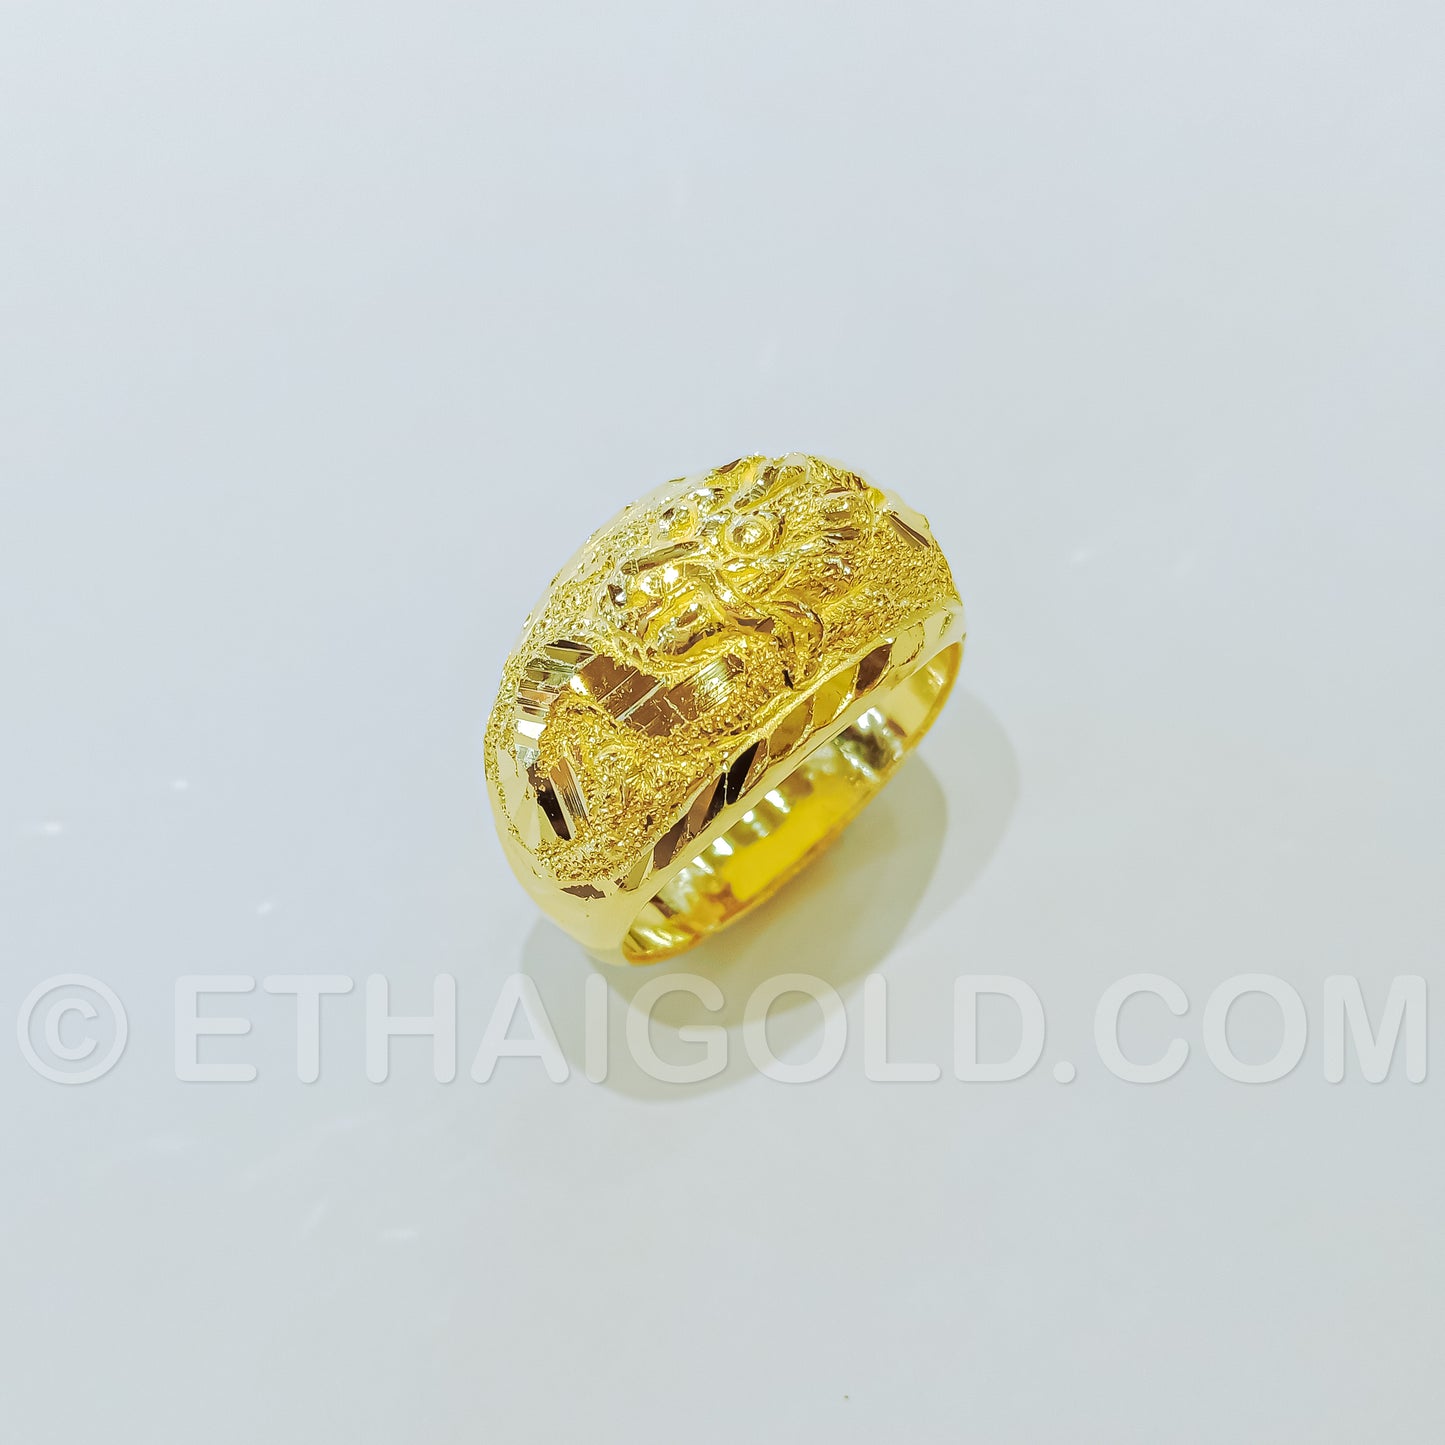 1/2 BAHT POLISHED SPARKLING DIAMOND-CUT HOLLOW DRAGON RING IN 23K GOLD (ID: R1302S)